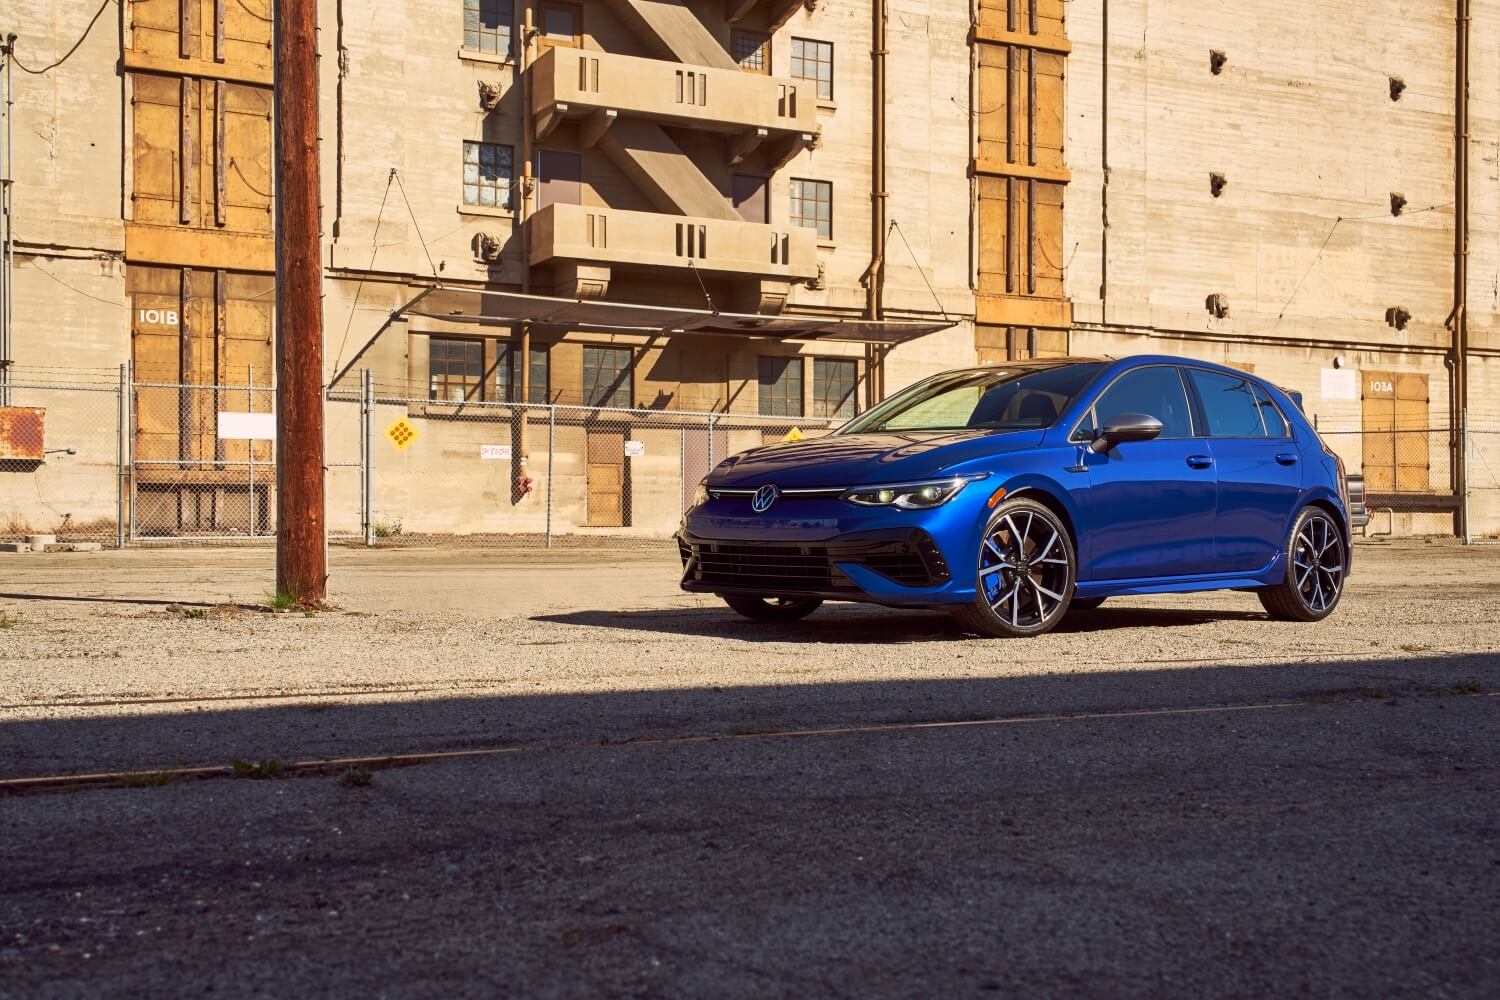 20th Anniversary Golf R is a luxury car and hot hatch in one